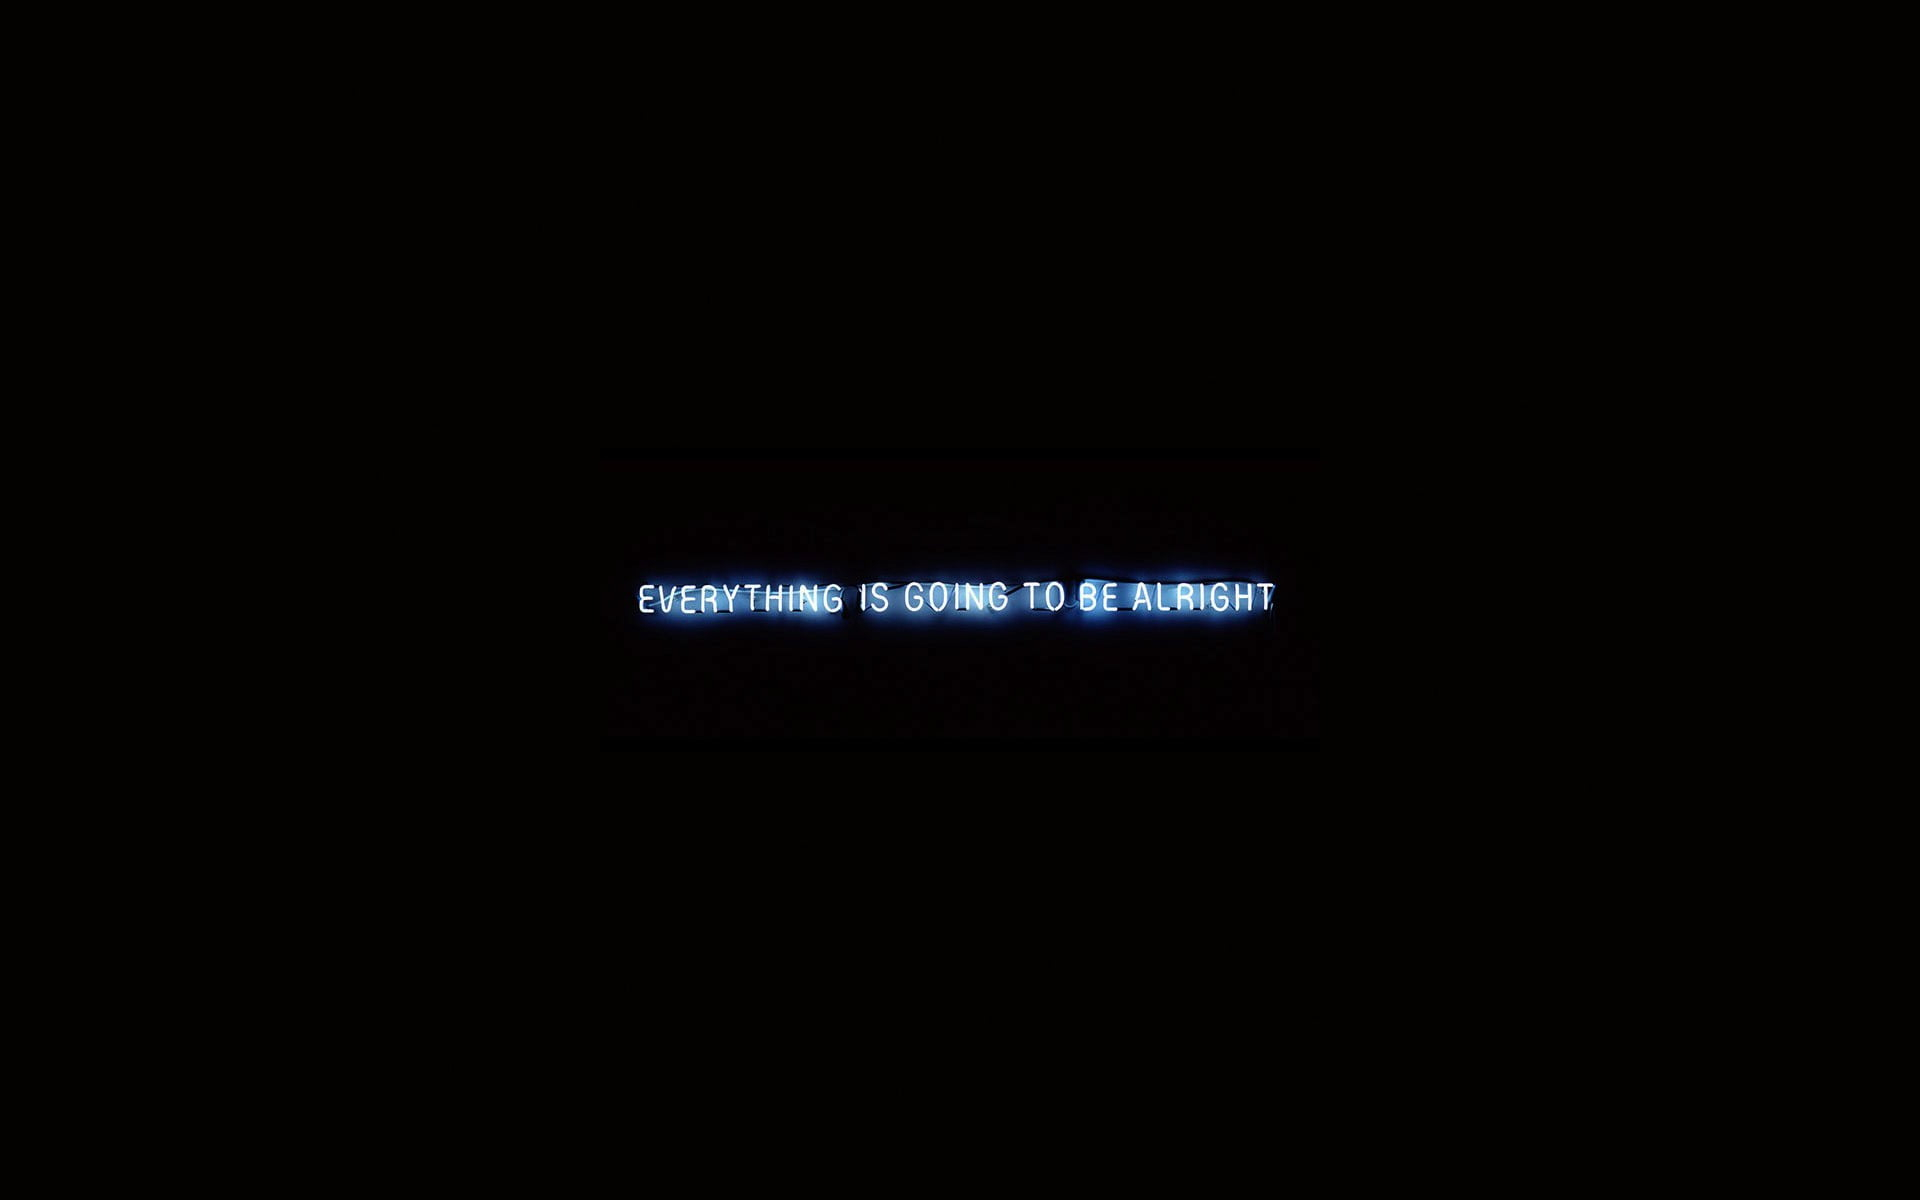 Everything is going to be alright wallpaper, black background, quote